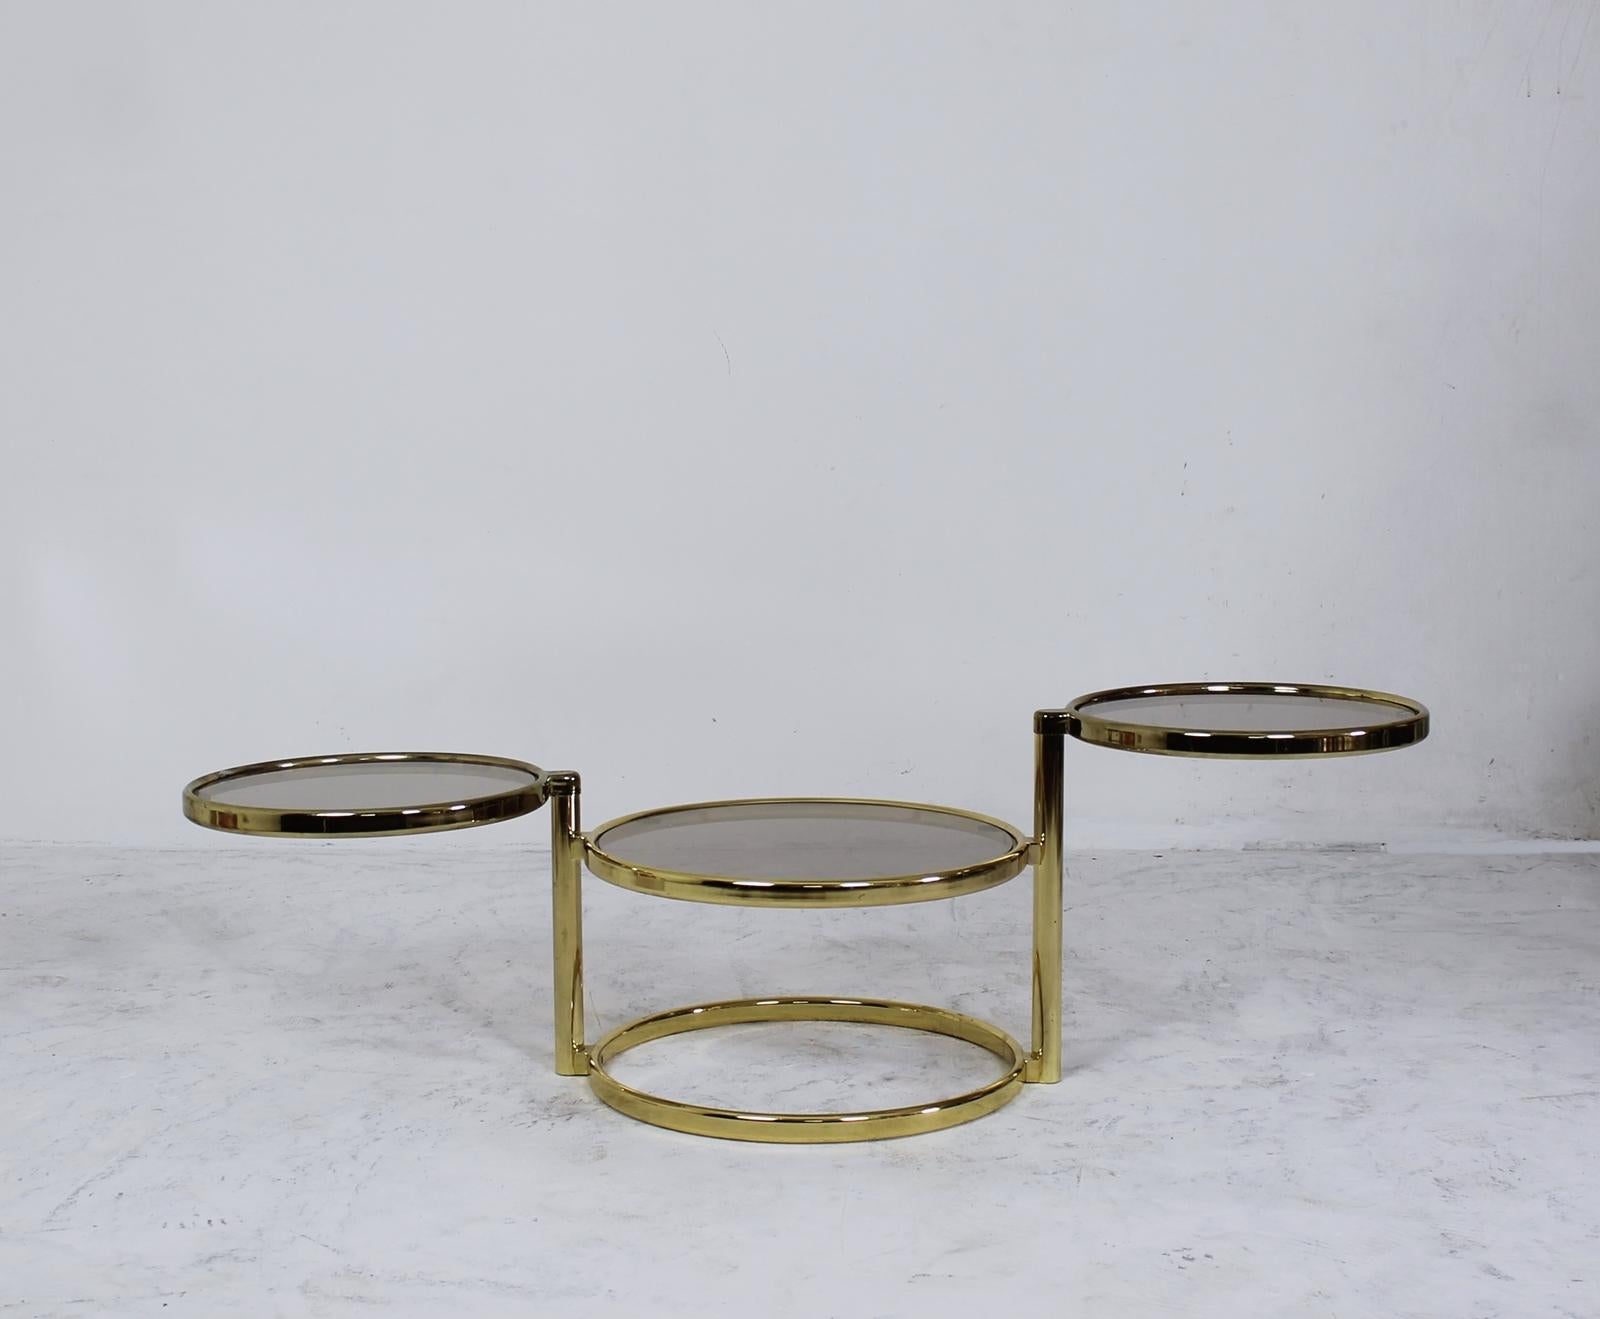 A three-tier brass plated metal structure swivel table. The top two tiers pivot to expand to a width of 132cm. Functions as a side table when closed or a coffee table when fully open. Glass has a slightly smokey tone.